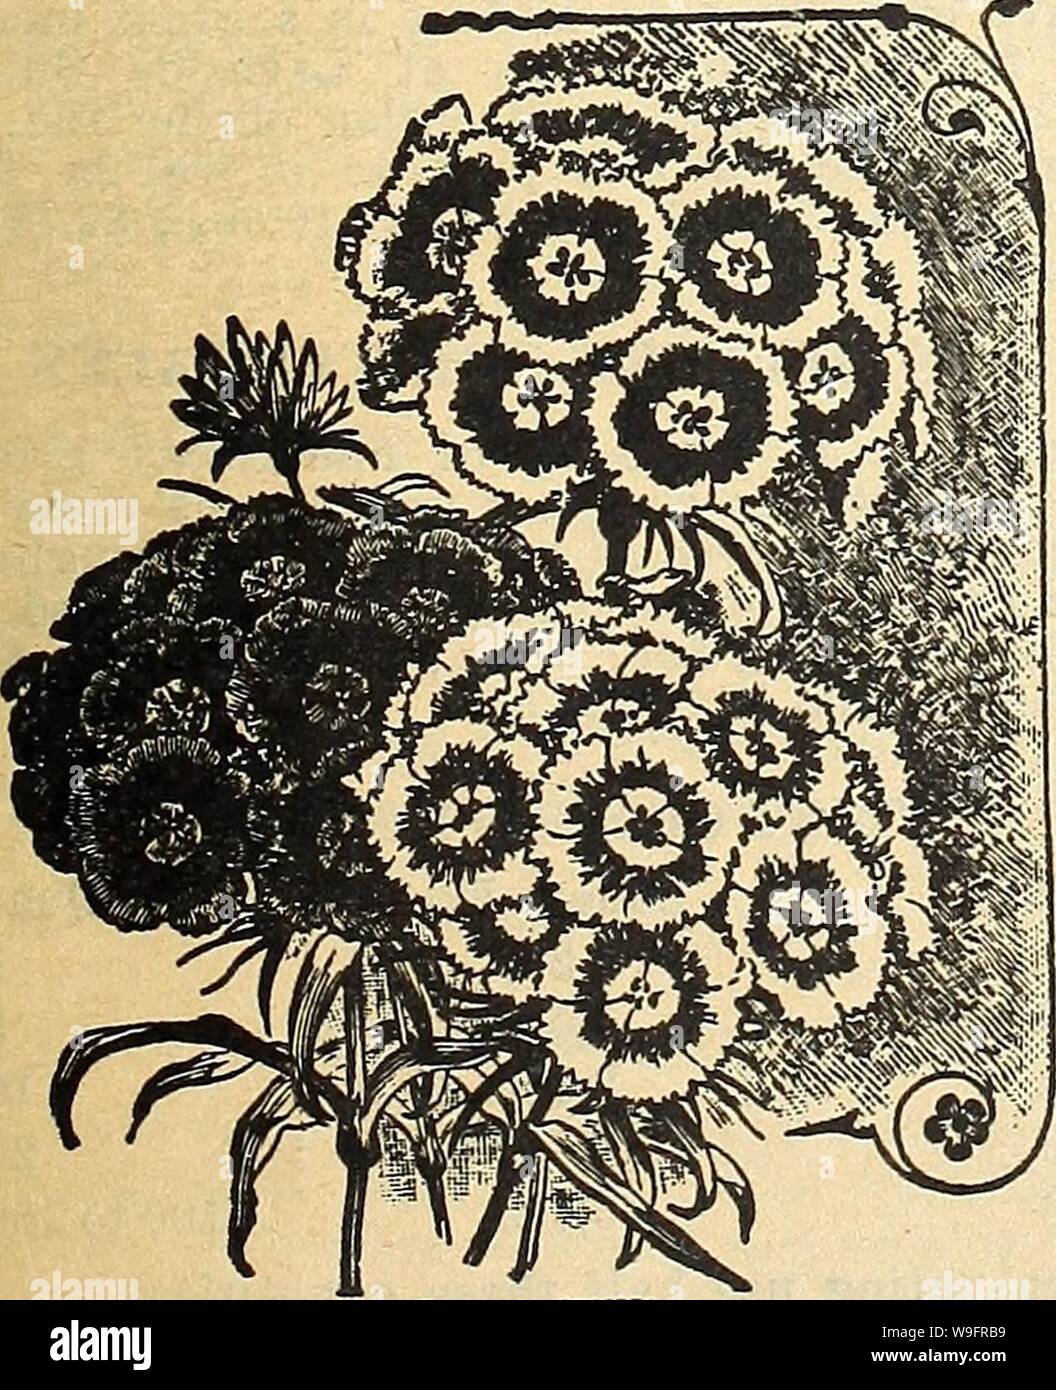 Archive image from page 64 of Currie's garden annual  63rd. Currie's garden annual : 63rd year spring 1938  curriesgardenann19curr 4 Year: 1938 ( CURRIE BROTHERS CO., MILWAUKEE, WIS. Page 61 STATICE (Sea Lavender) LATIFOLIA—A valuable border plant with tufts of leathery leaves and large heads of purplish-blue flow- ers. Plants, price, each, 25c; per doz., $2.50; seeds Pkt. 10c DUMOSA—Forms densely packed cushions of silvery gray flowers. The stems are stiff and wiry, the panicles are thickly covered with blossoms. 2 ft. Seeds, Pkt. 25c STOKESIA (Cornflower or Stokes' Aster) Plants grow about 1 Stock Photo